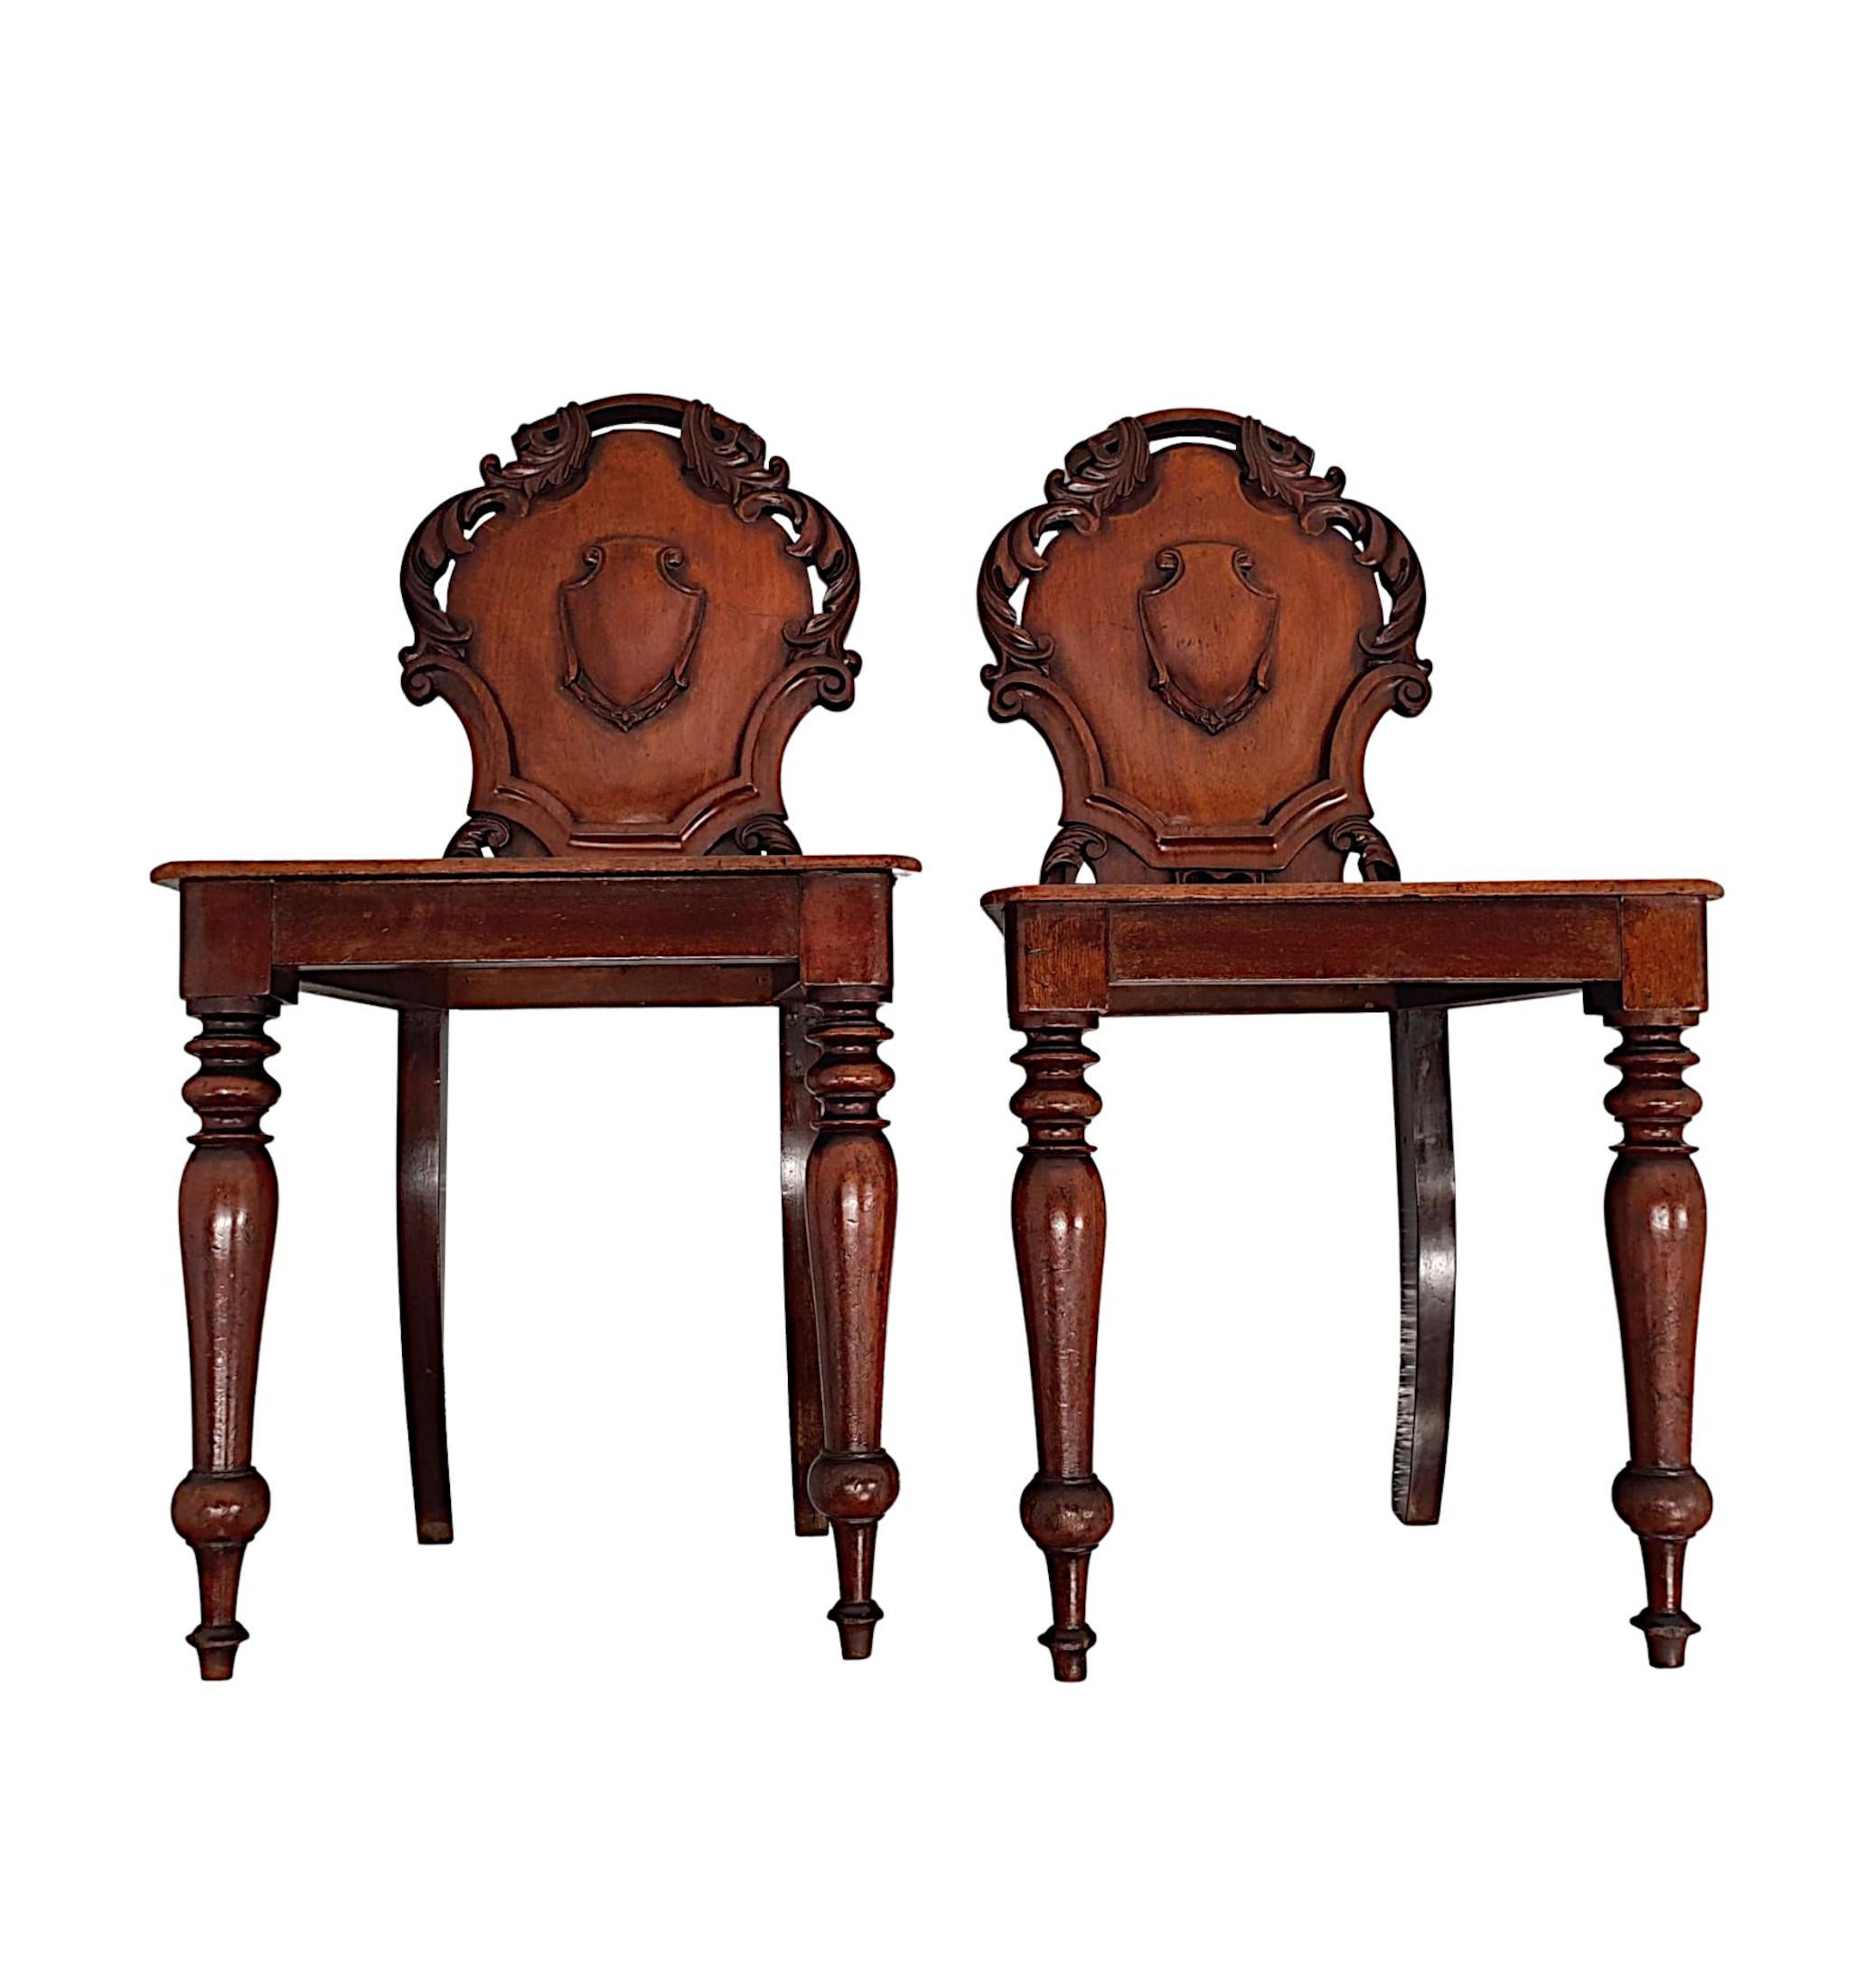 English A Very Fine Pair of 19th Century Hall Chairs For Sale